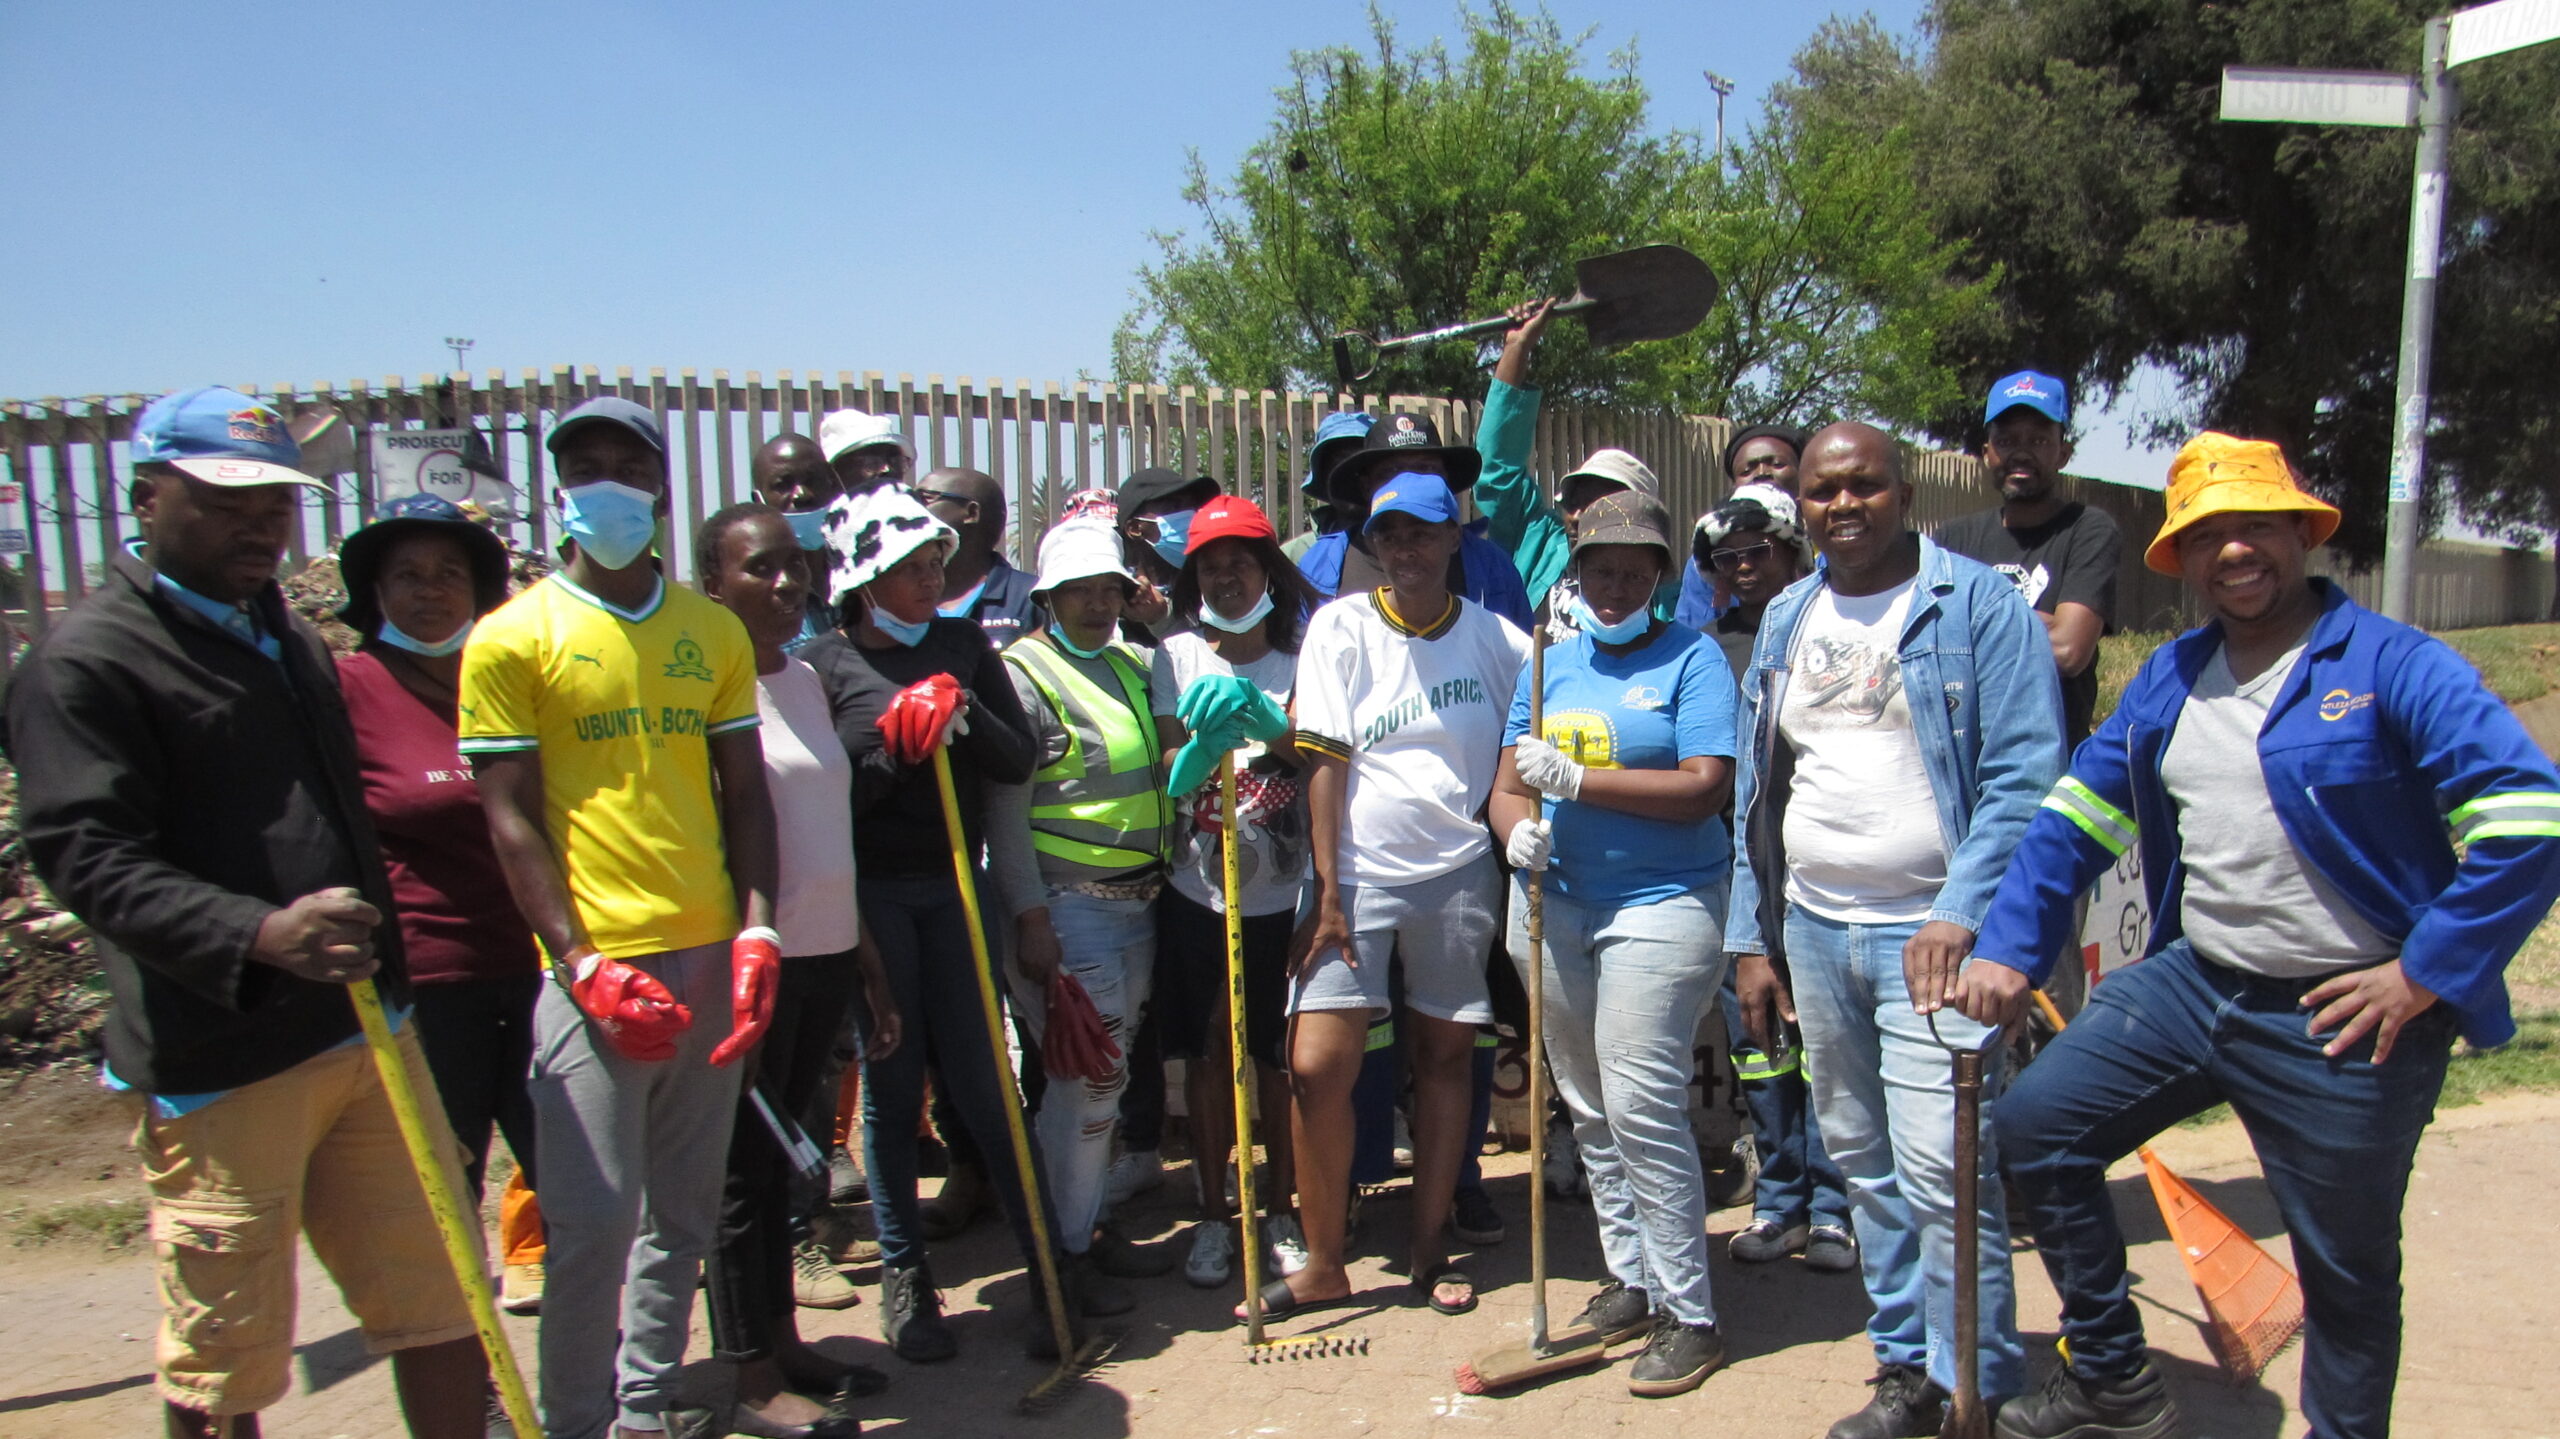 volunteers who clean up the illegal dumping in corner Tsomo street and Mathlare street in Mamelodi east, Tshwane